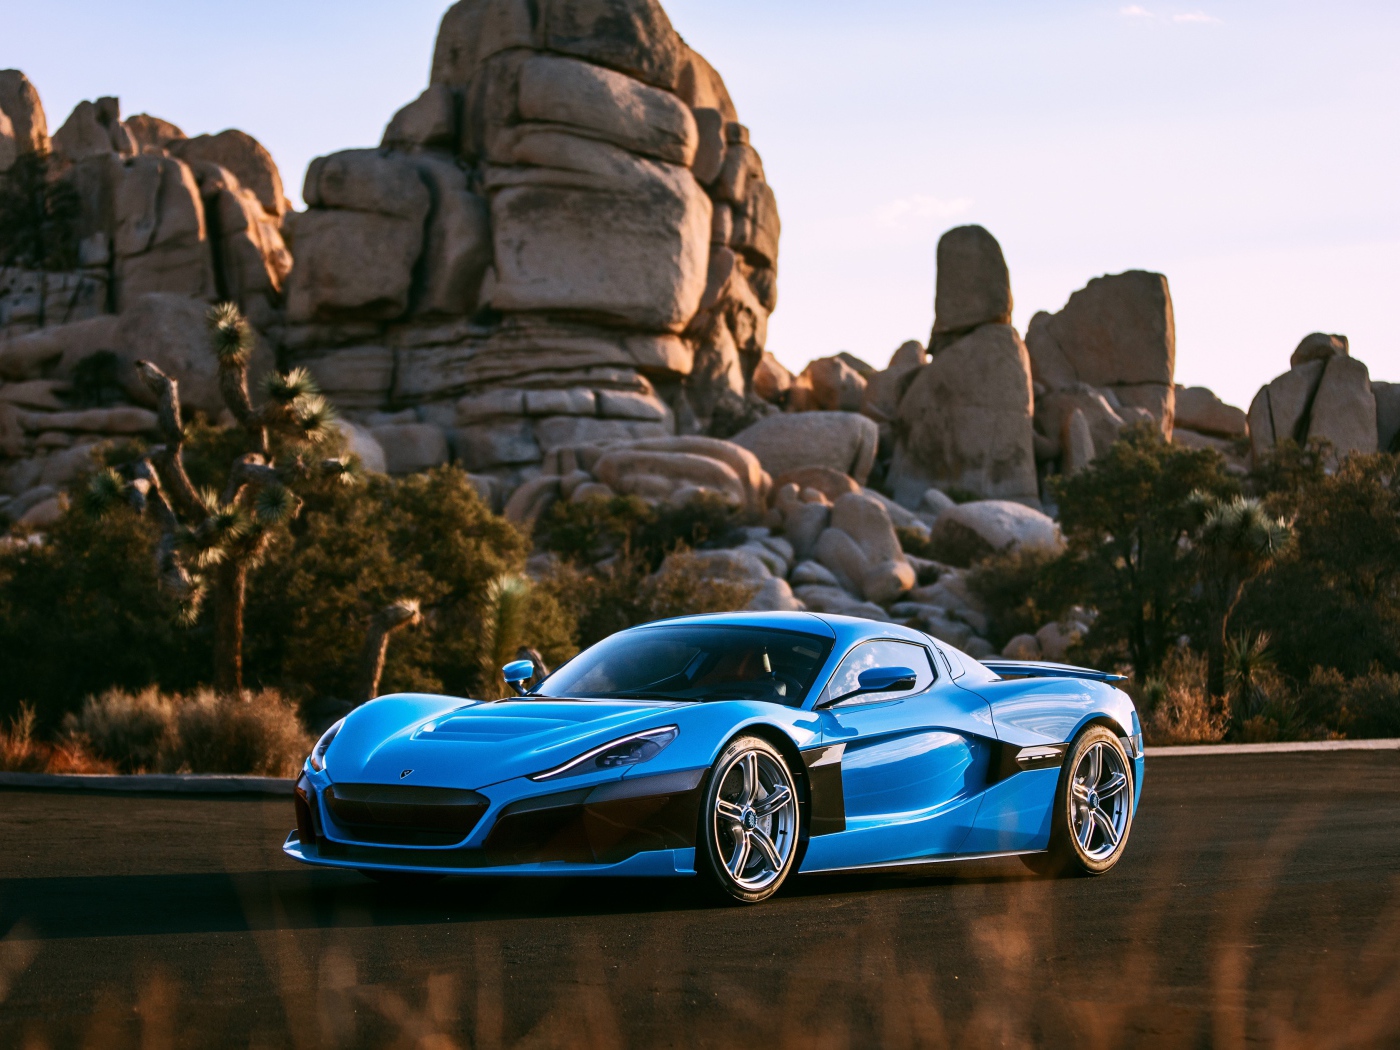 Blue sports car Rimac C_Two against the background of mountains